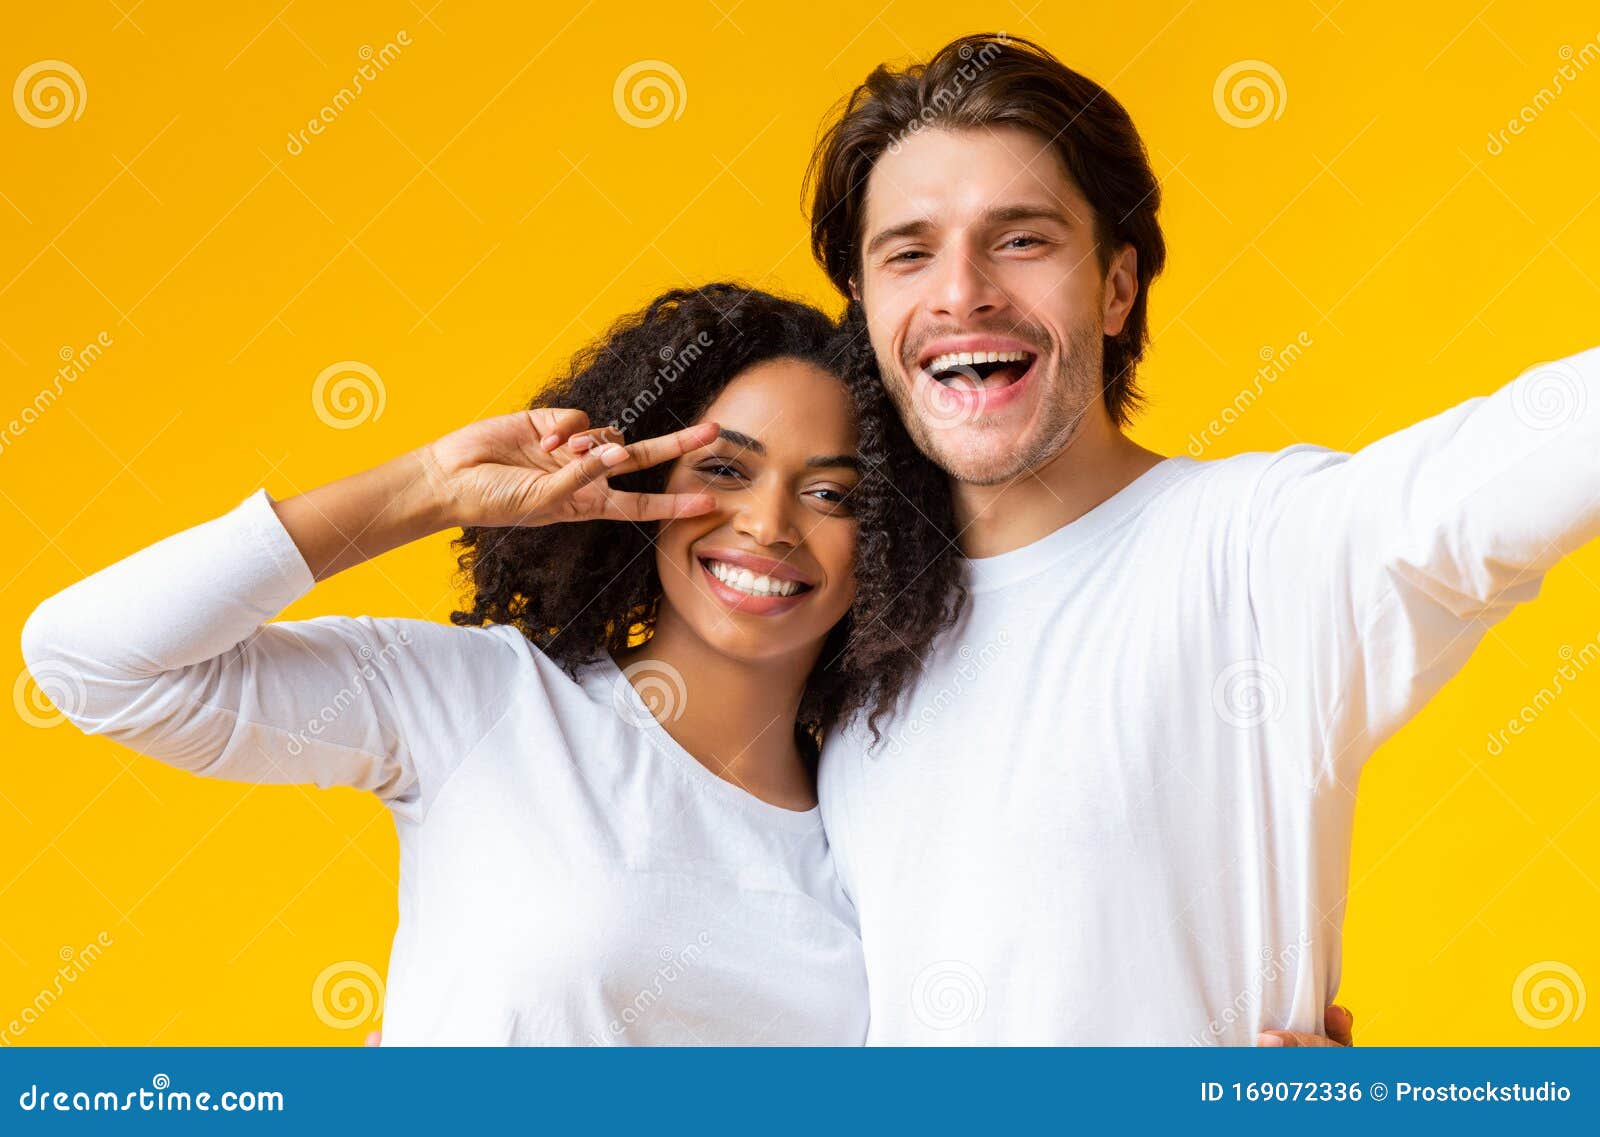 Download Romantic Mixed-Race Couple Taking Selfie. Cheerful Black ...